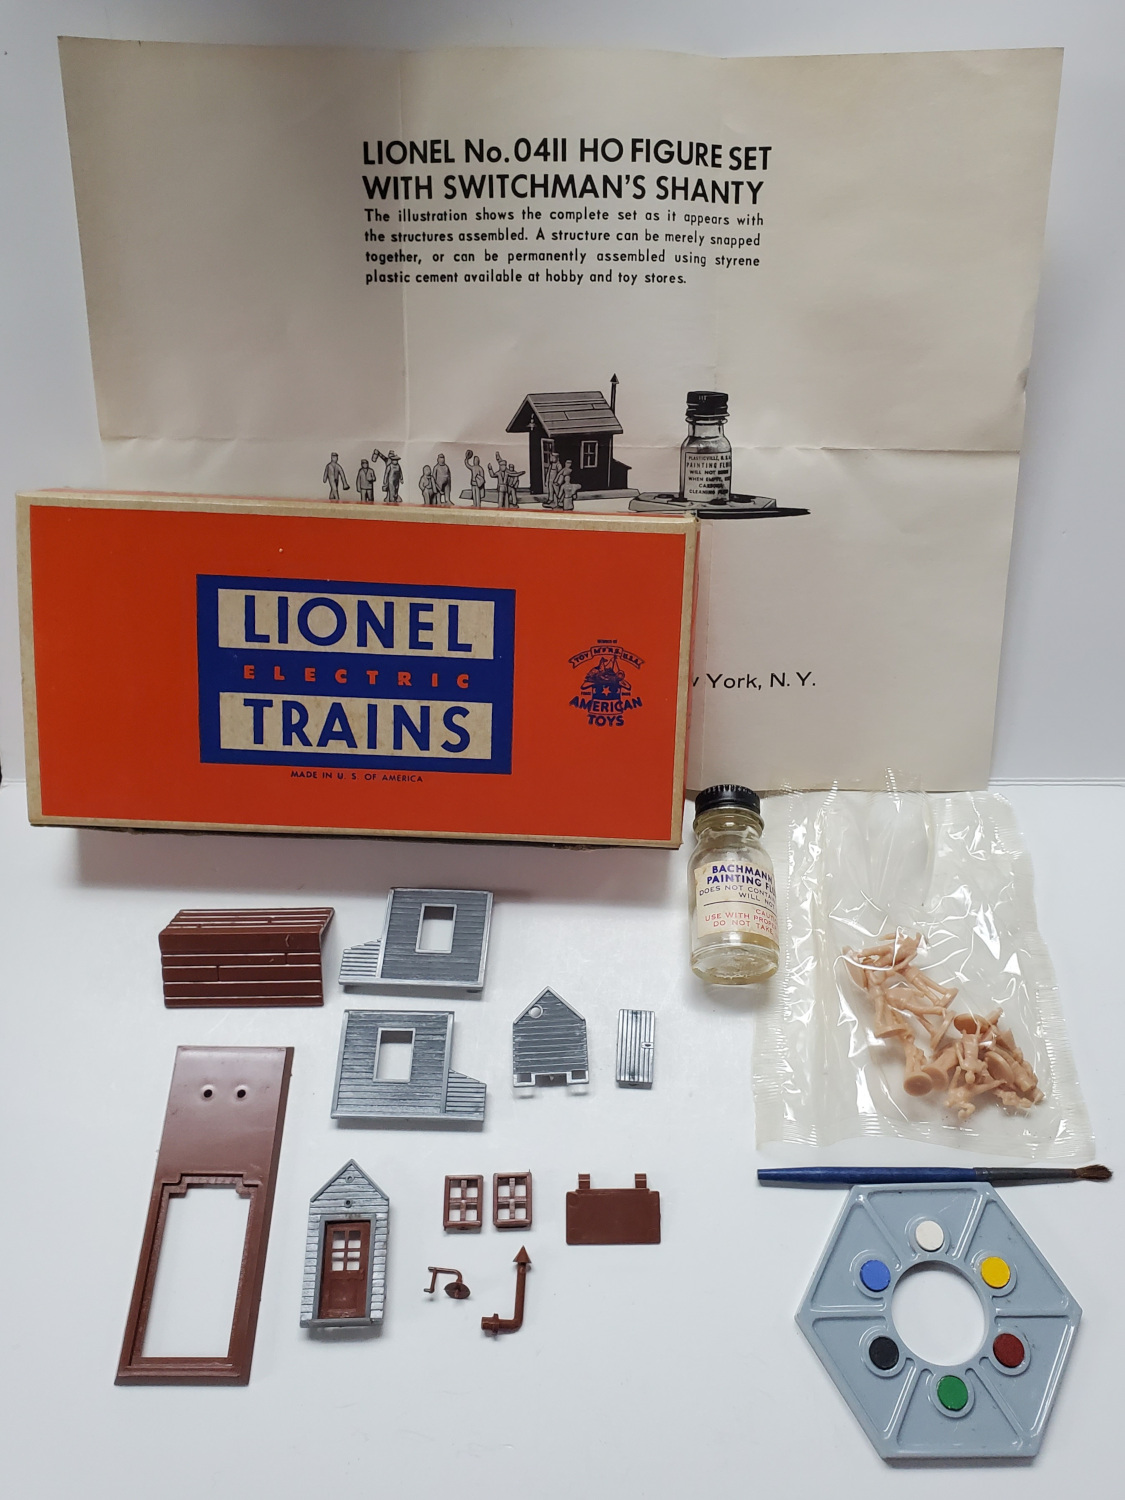 1959 Lionel Electric Trains No. 1411 HO Switchman Shanty with Figure Set in Box 1